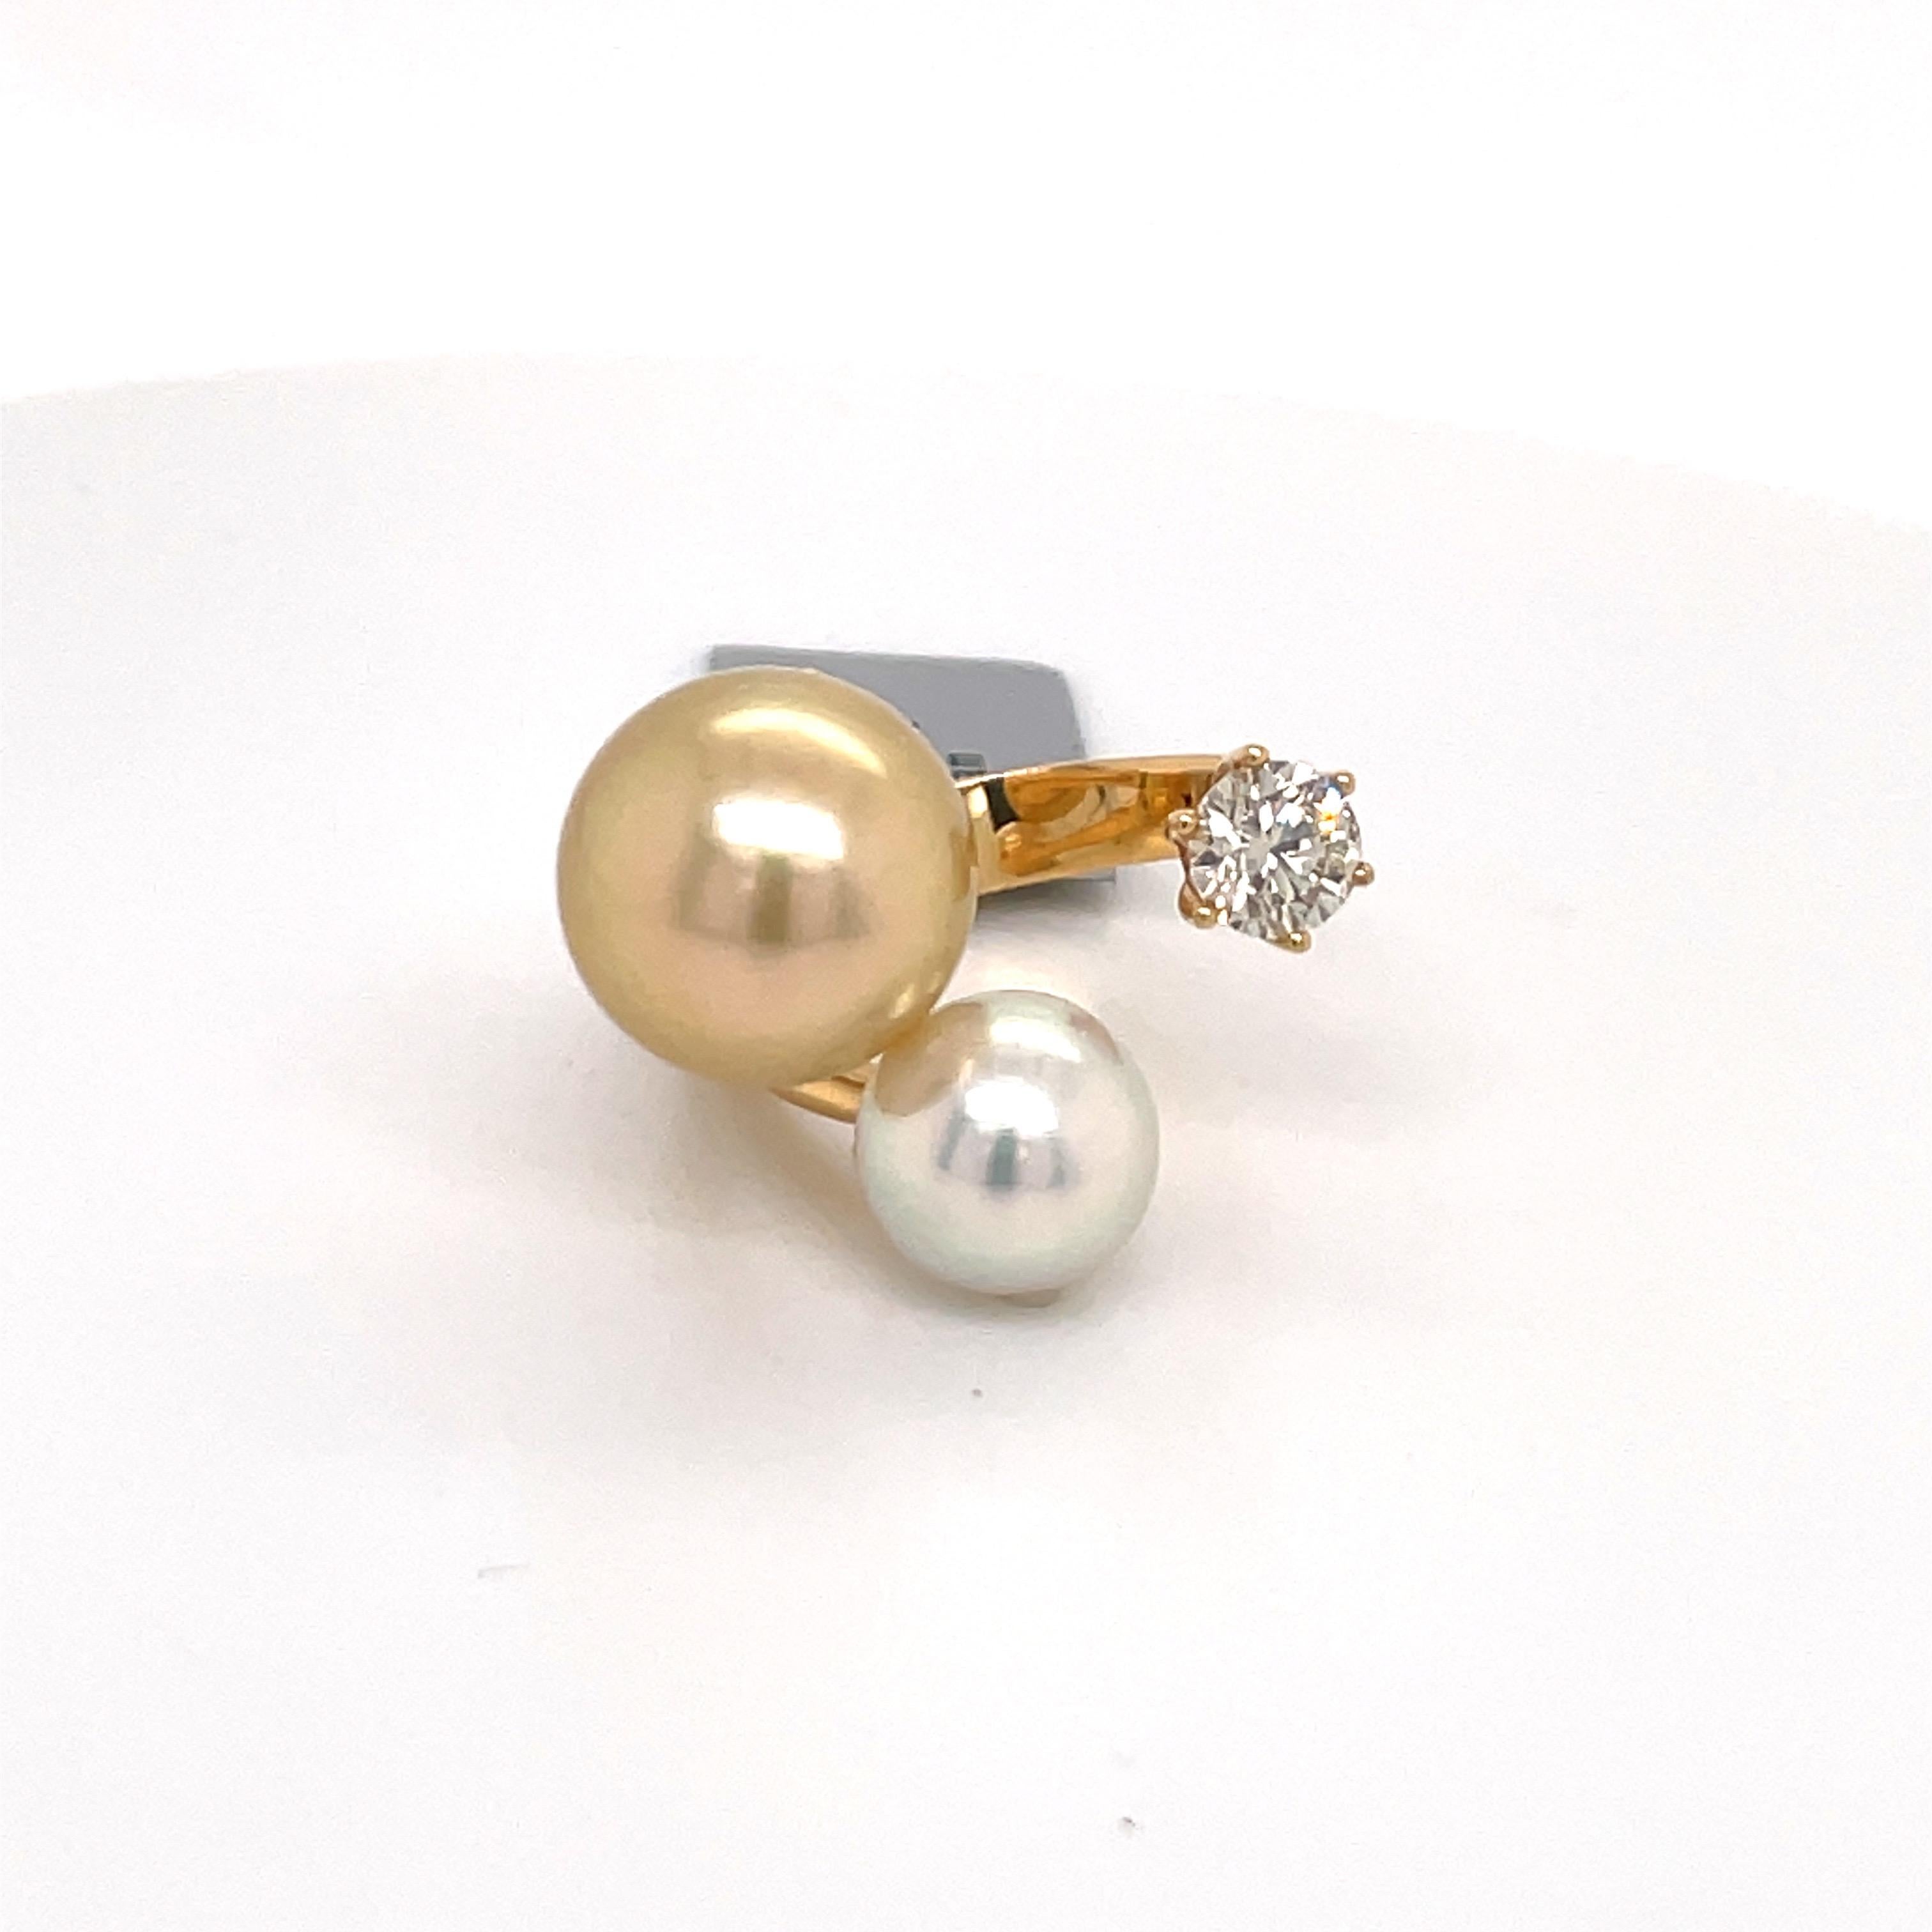 18 karat yellow gold fashion ring featuring one Golden Pearl measuring 12 mm and one South Sea Pearl measuring 9 mm and a round brilliant weighing 0.50 carats.
Color G-H
Clarity SI